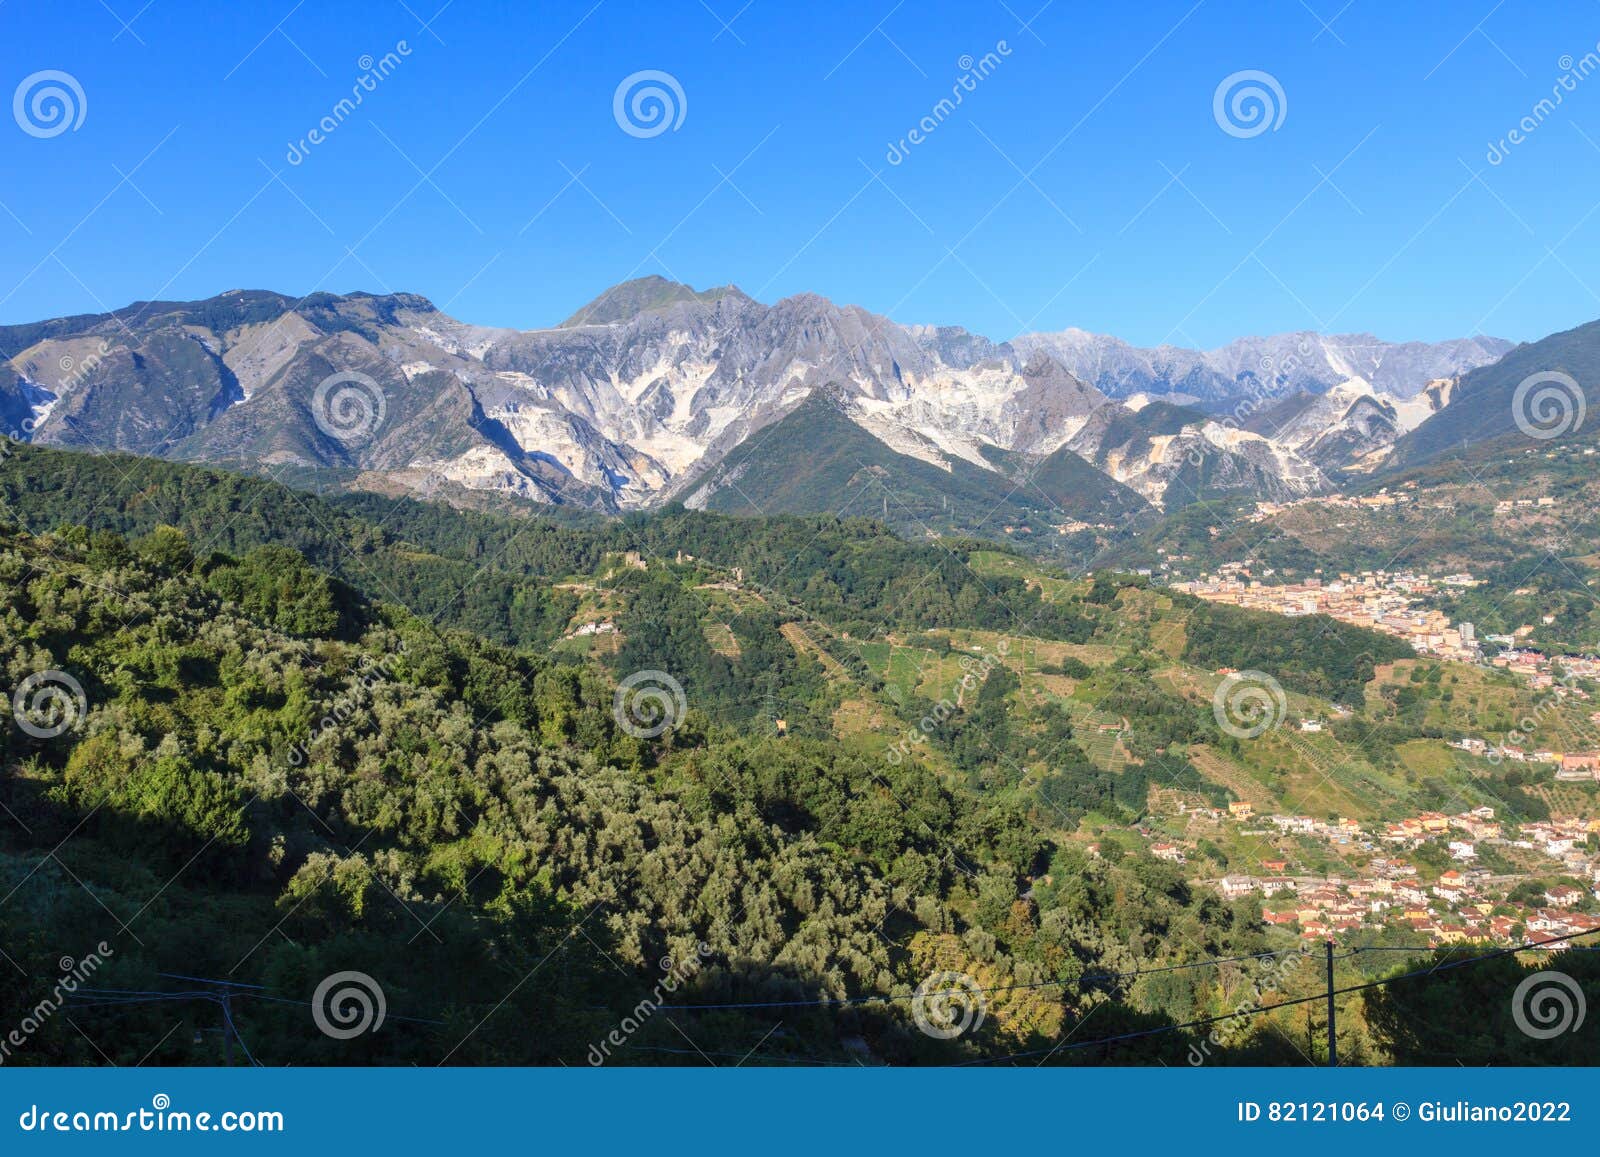 panoramic view of alpi apuane mountain chain in tuscany, italy